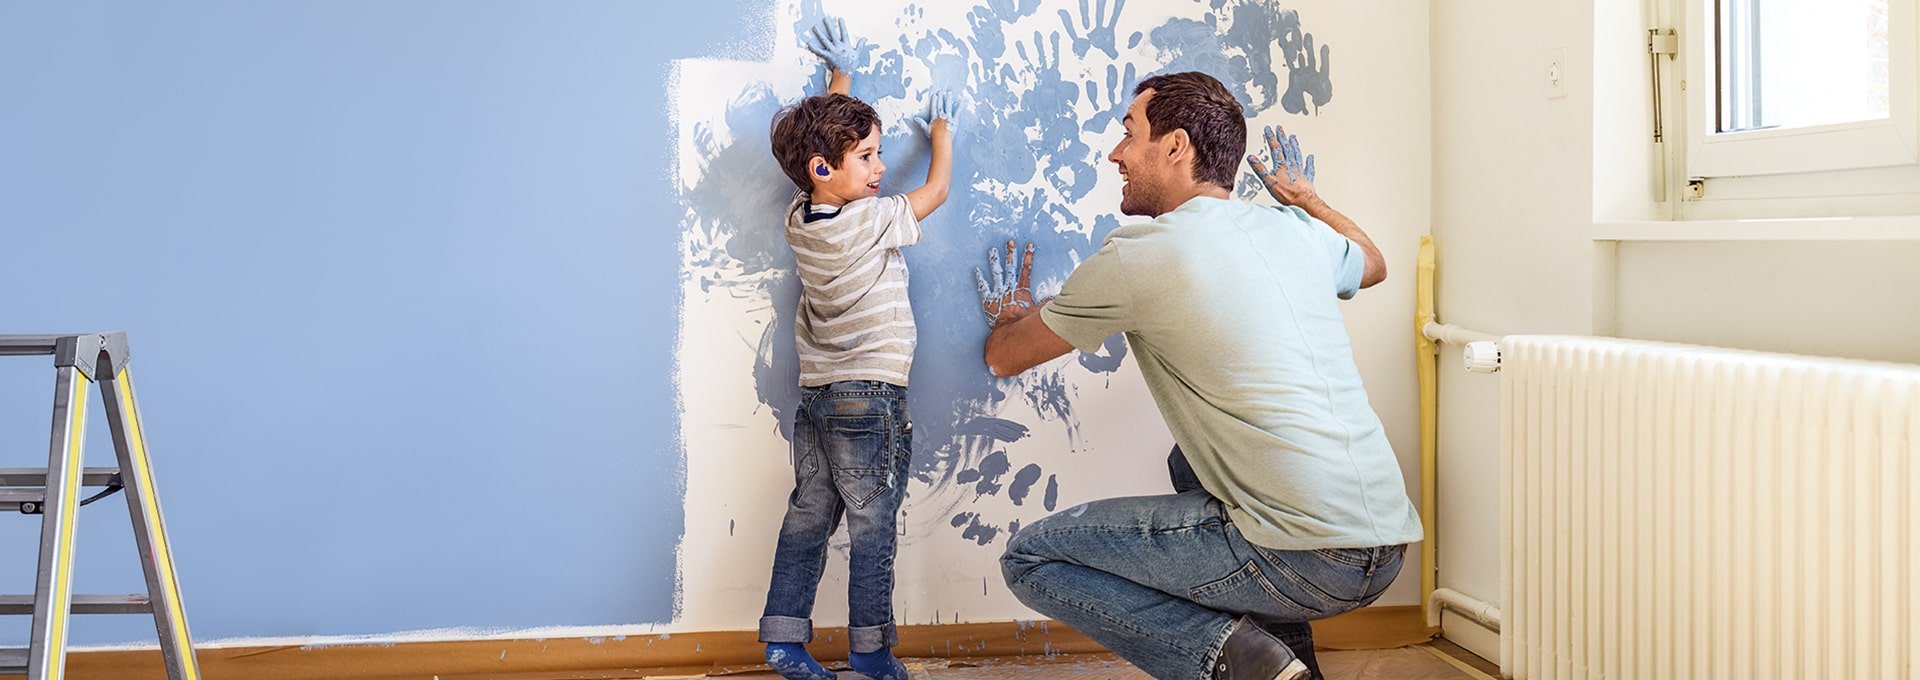 Father and son with Bernafon Leox Super Power|Ultra Power hearing aids painting a wall and spontaneously adding hand prints.